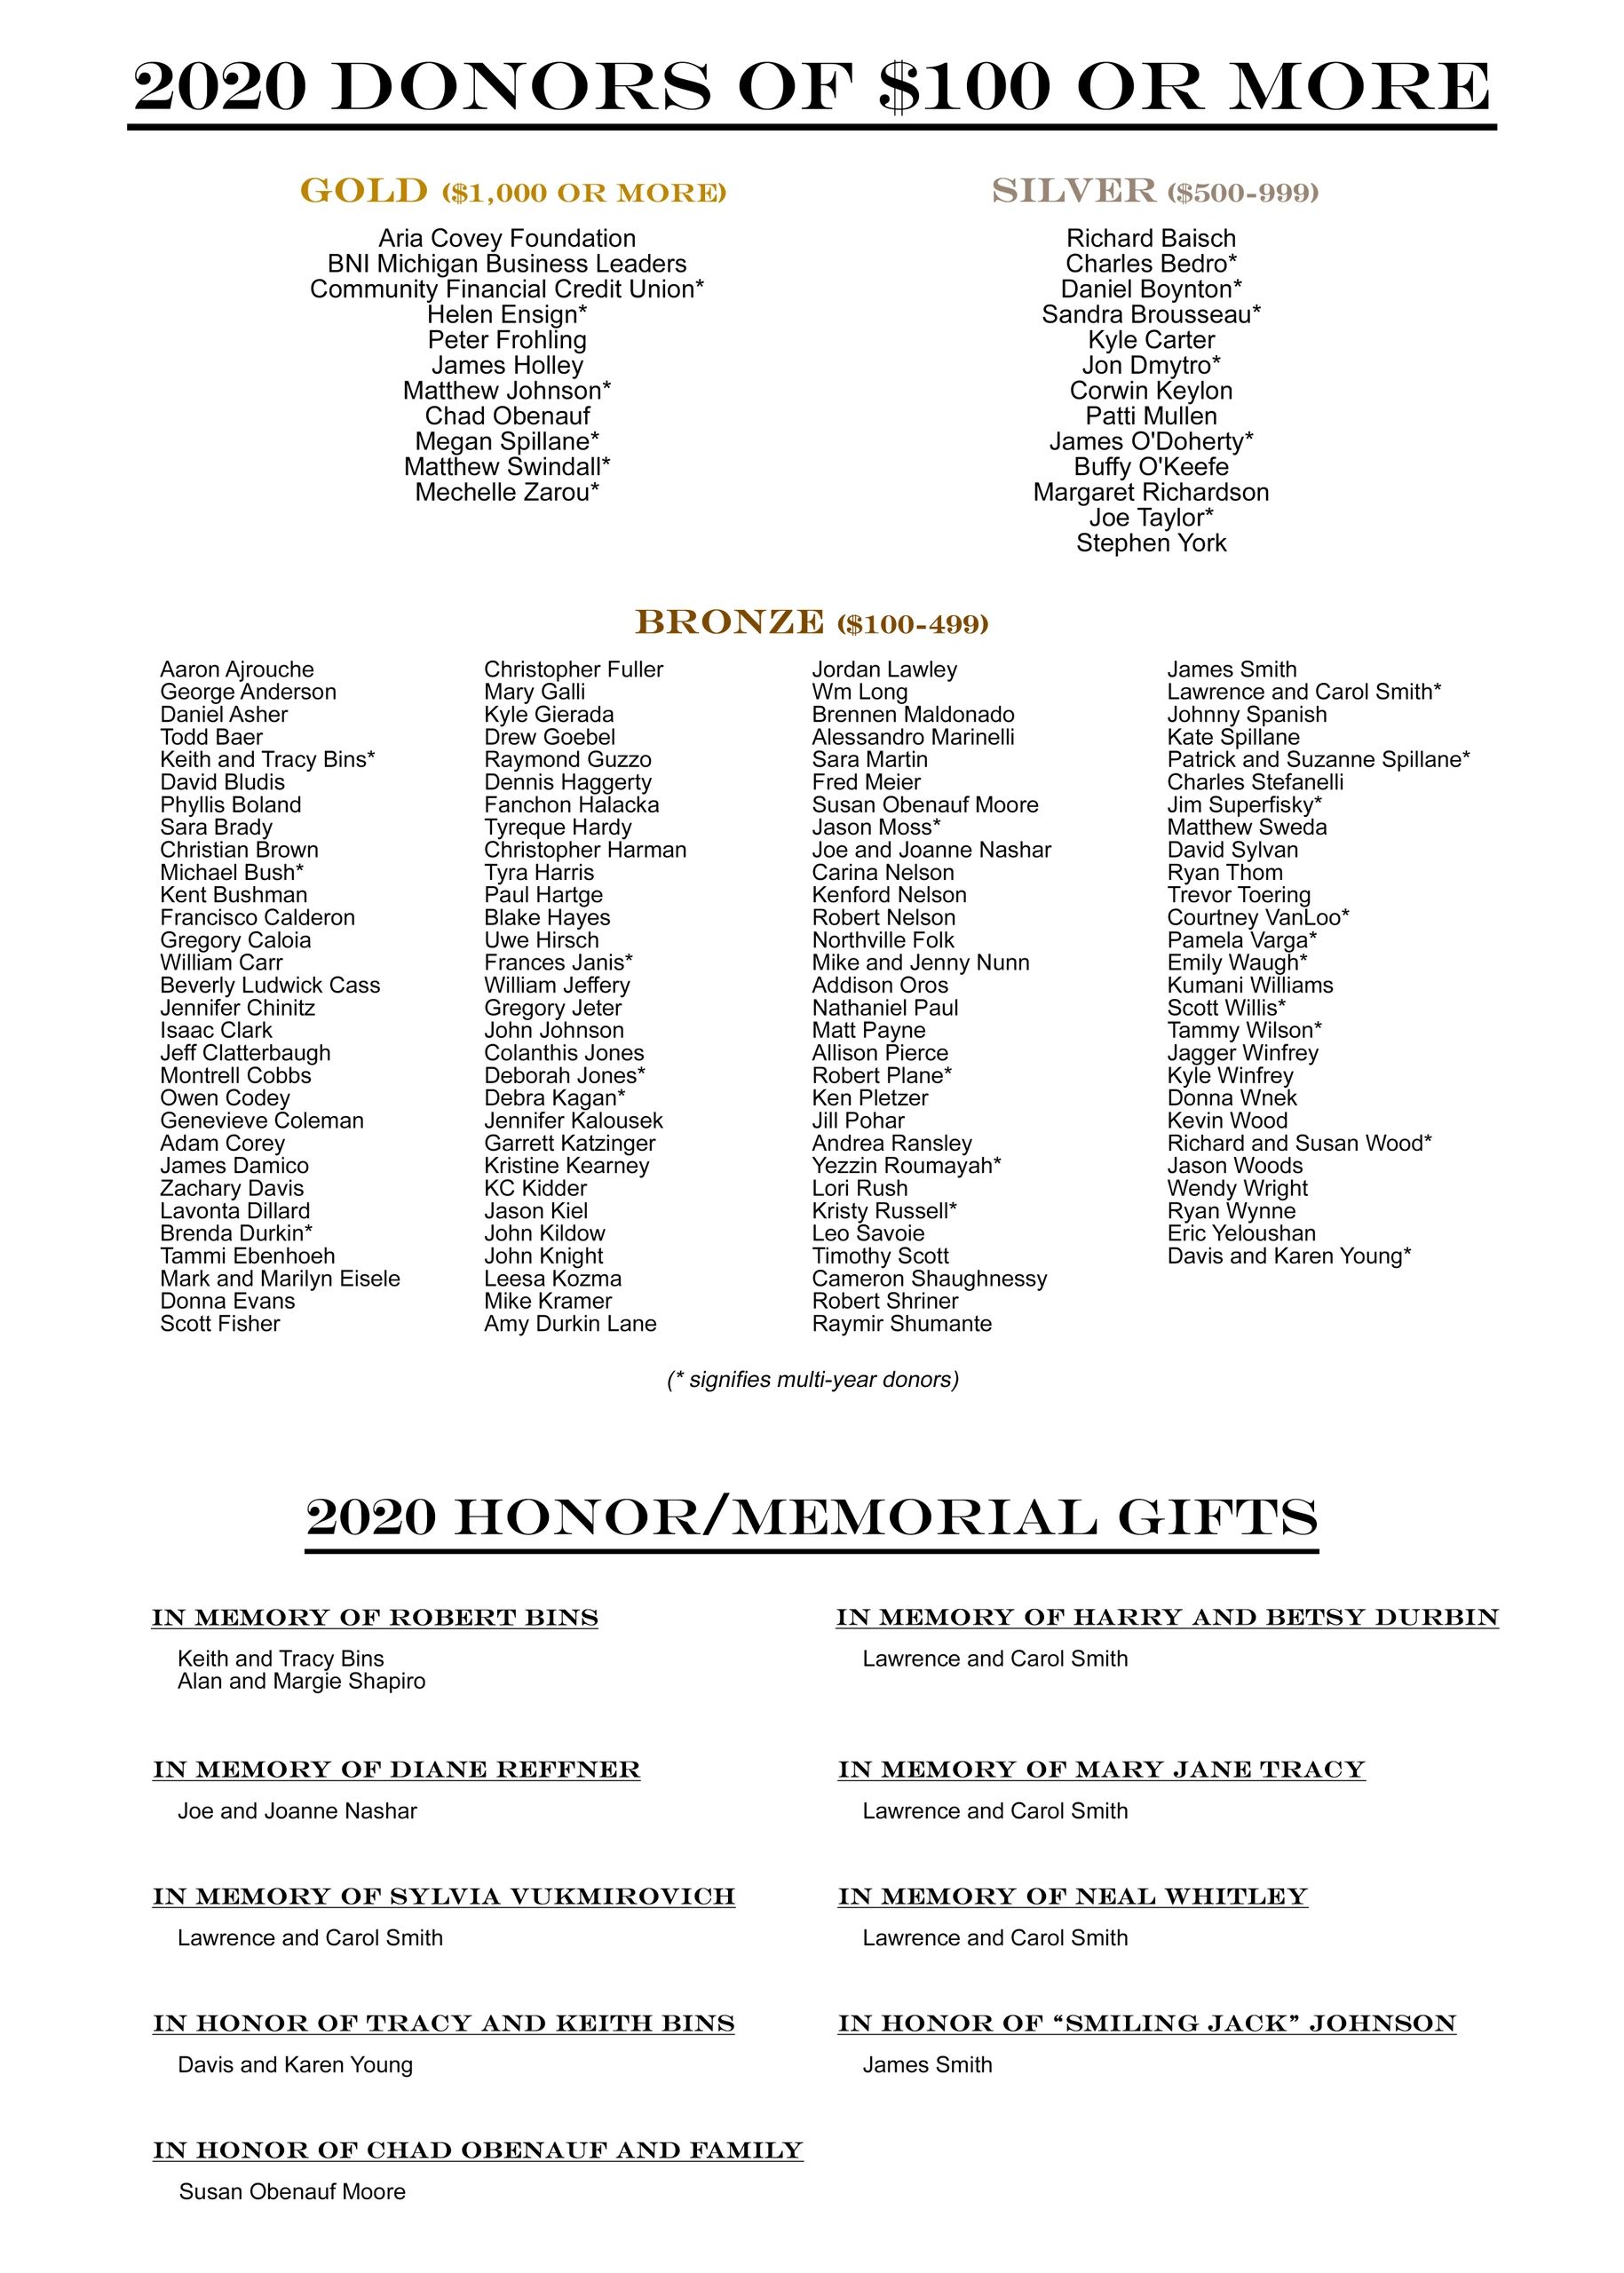 Listing of 2020 donors of $100 or more